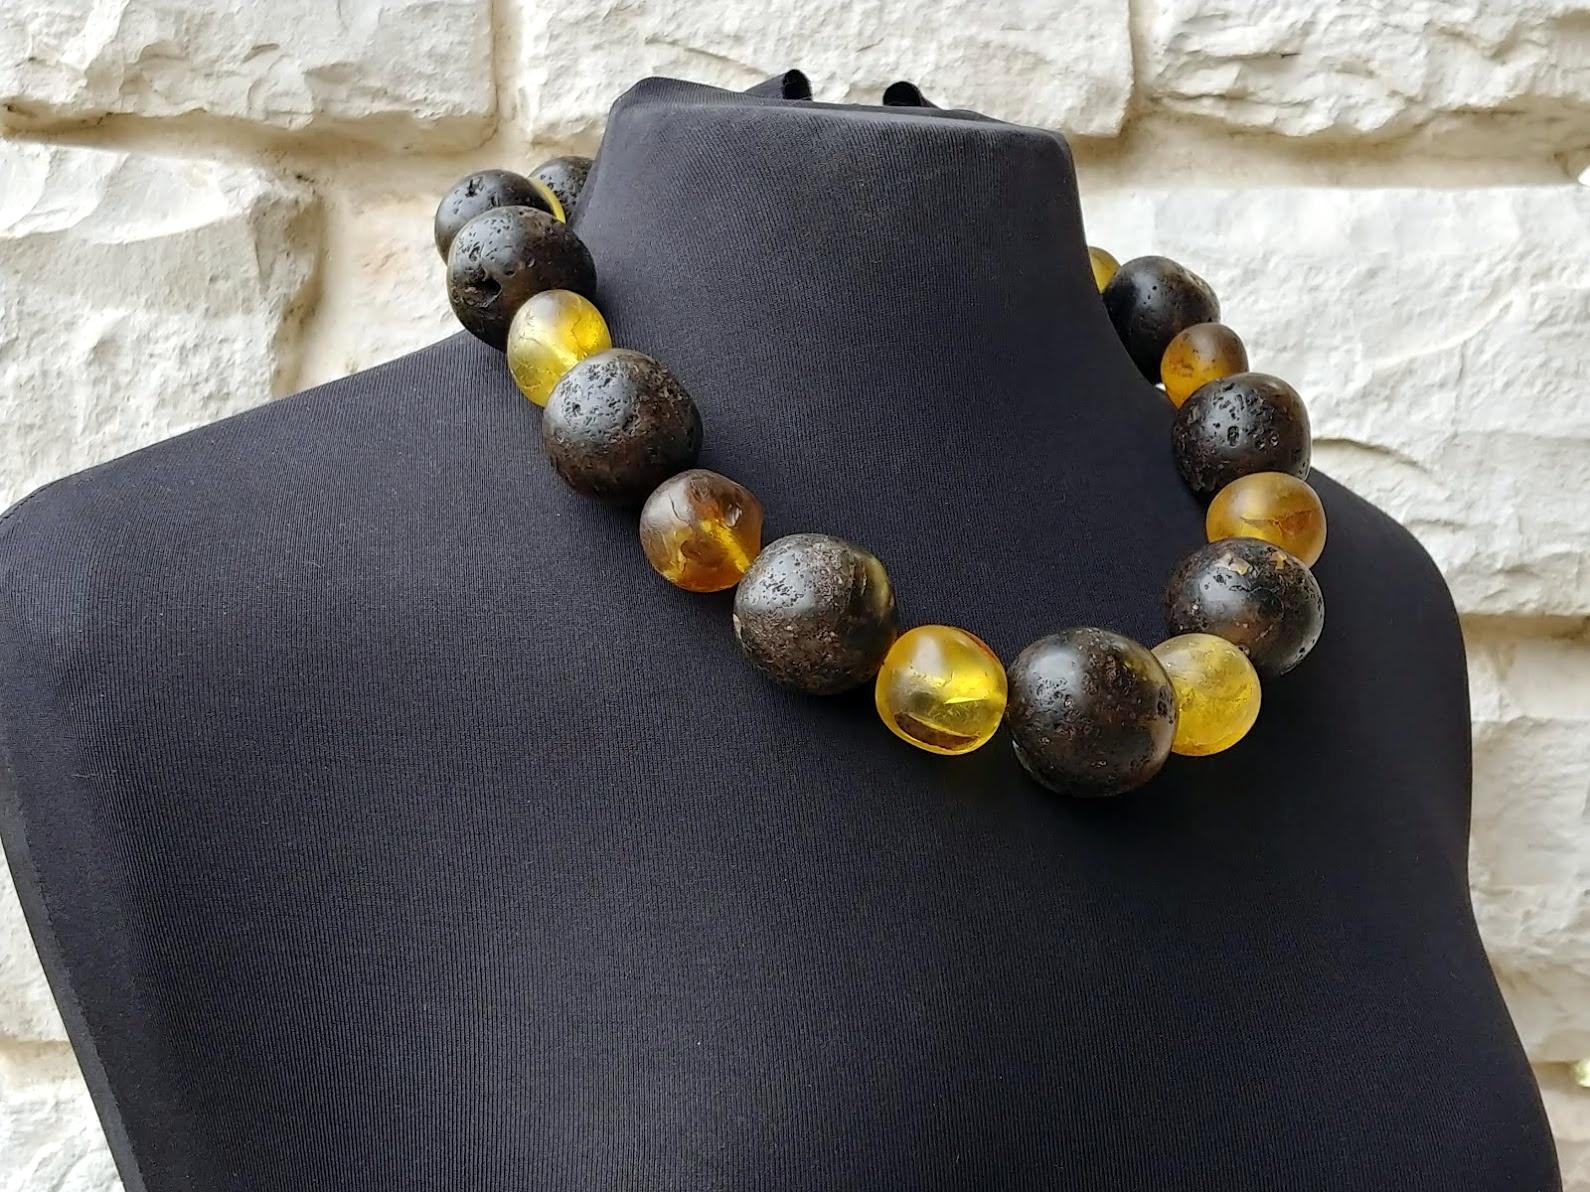 A genuine, ancient Baltic amber necklace weighing 229 grams, approx 1900s. The diameter of the largest bead approx 36mm. The diameter of the smallest bead approx 21mm. All beads were cut by hand, so they are not ideal round. They are not ideal, but